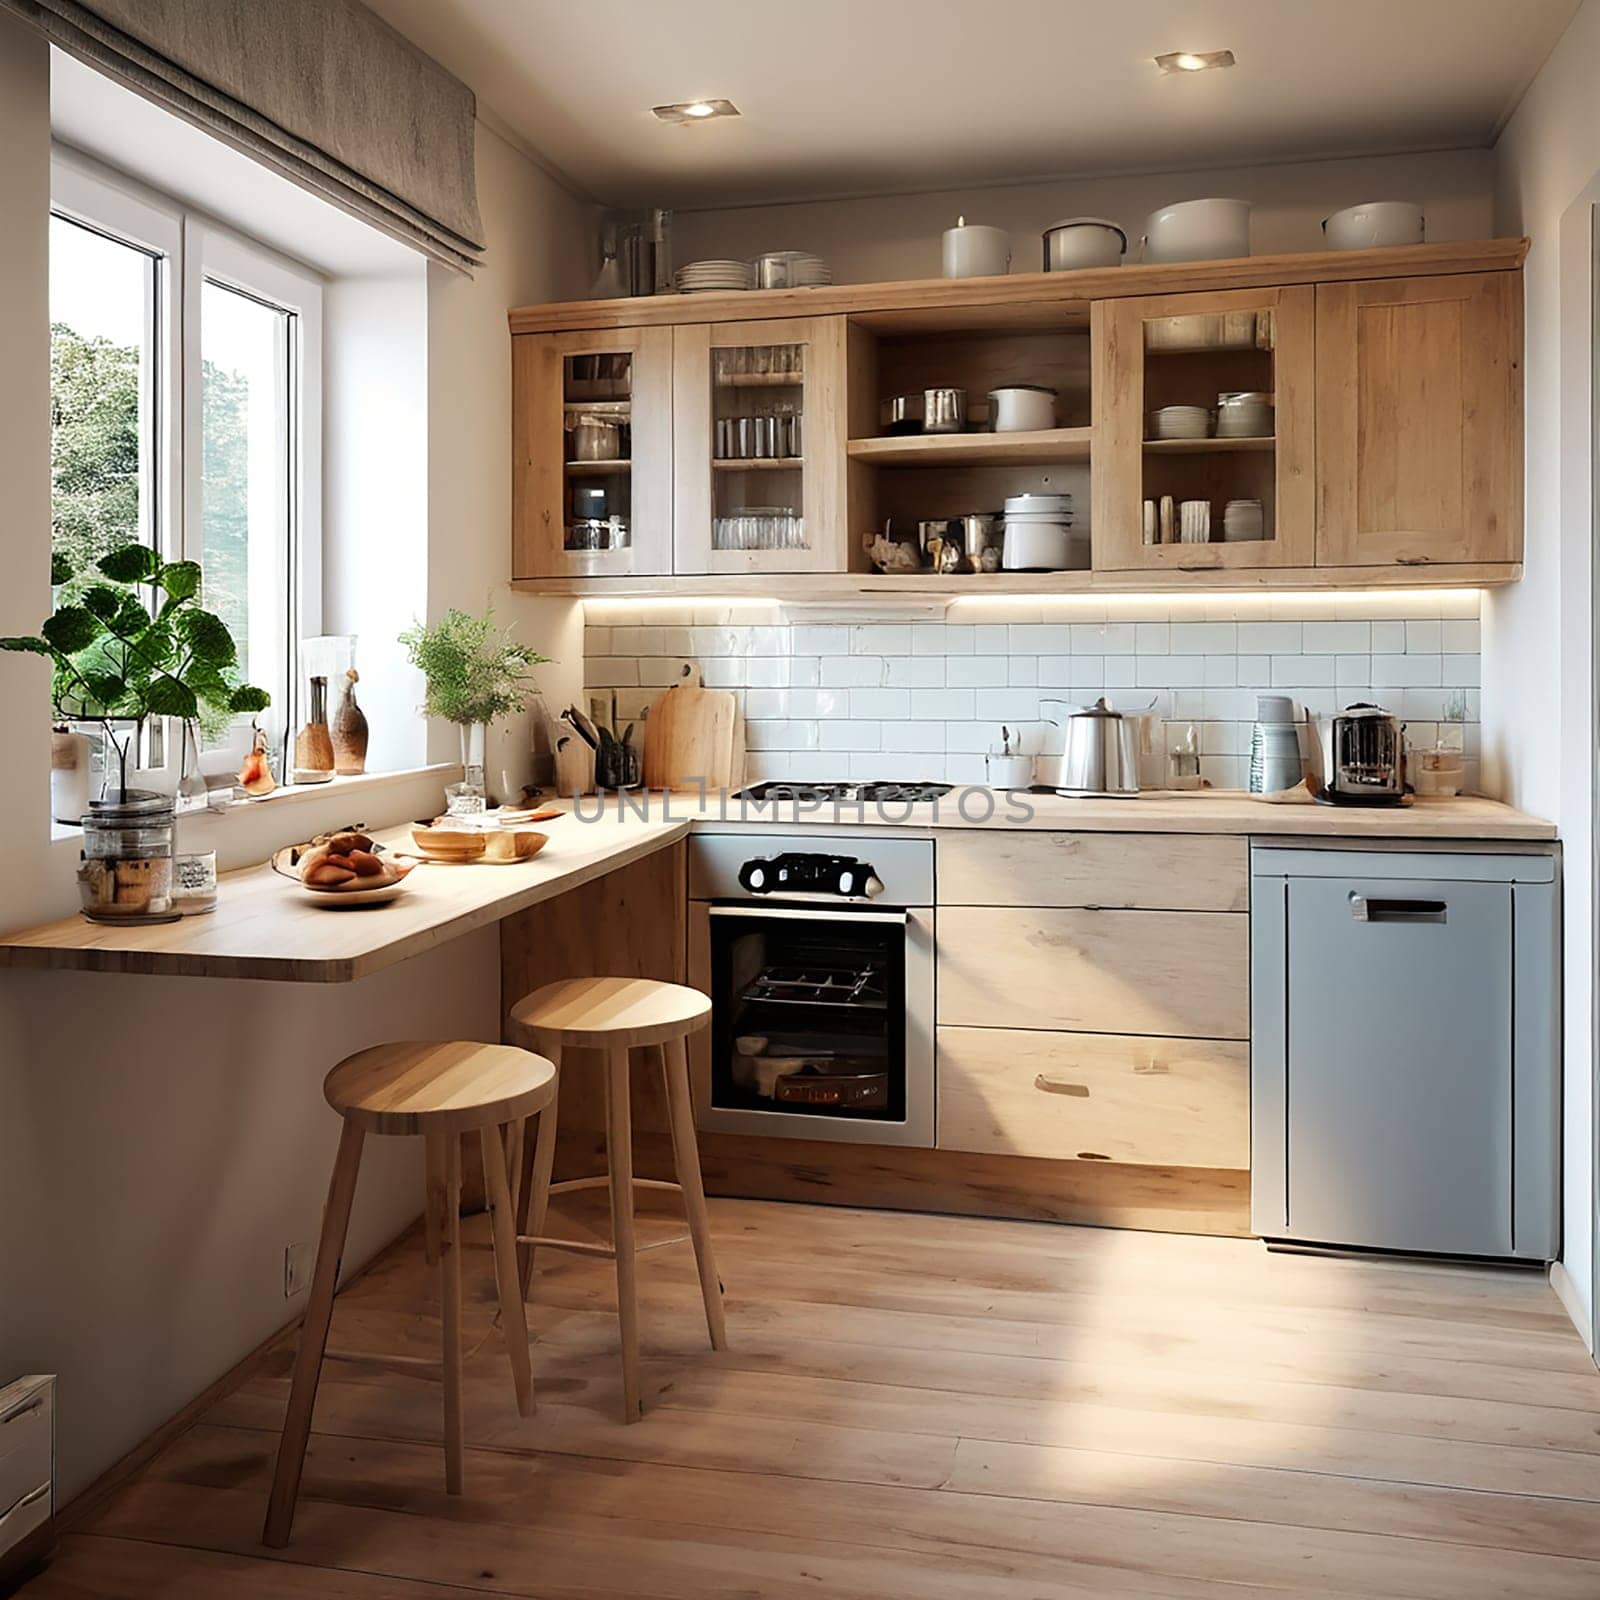 Kitchen Tranquility: Creating a Calming Atmosphere for Cooking Bliss